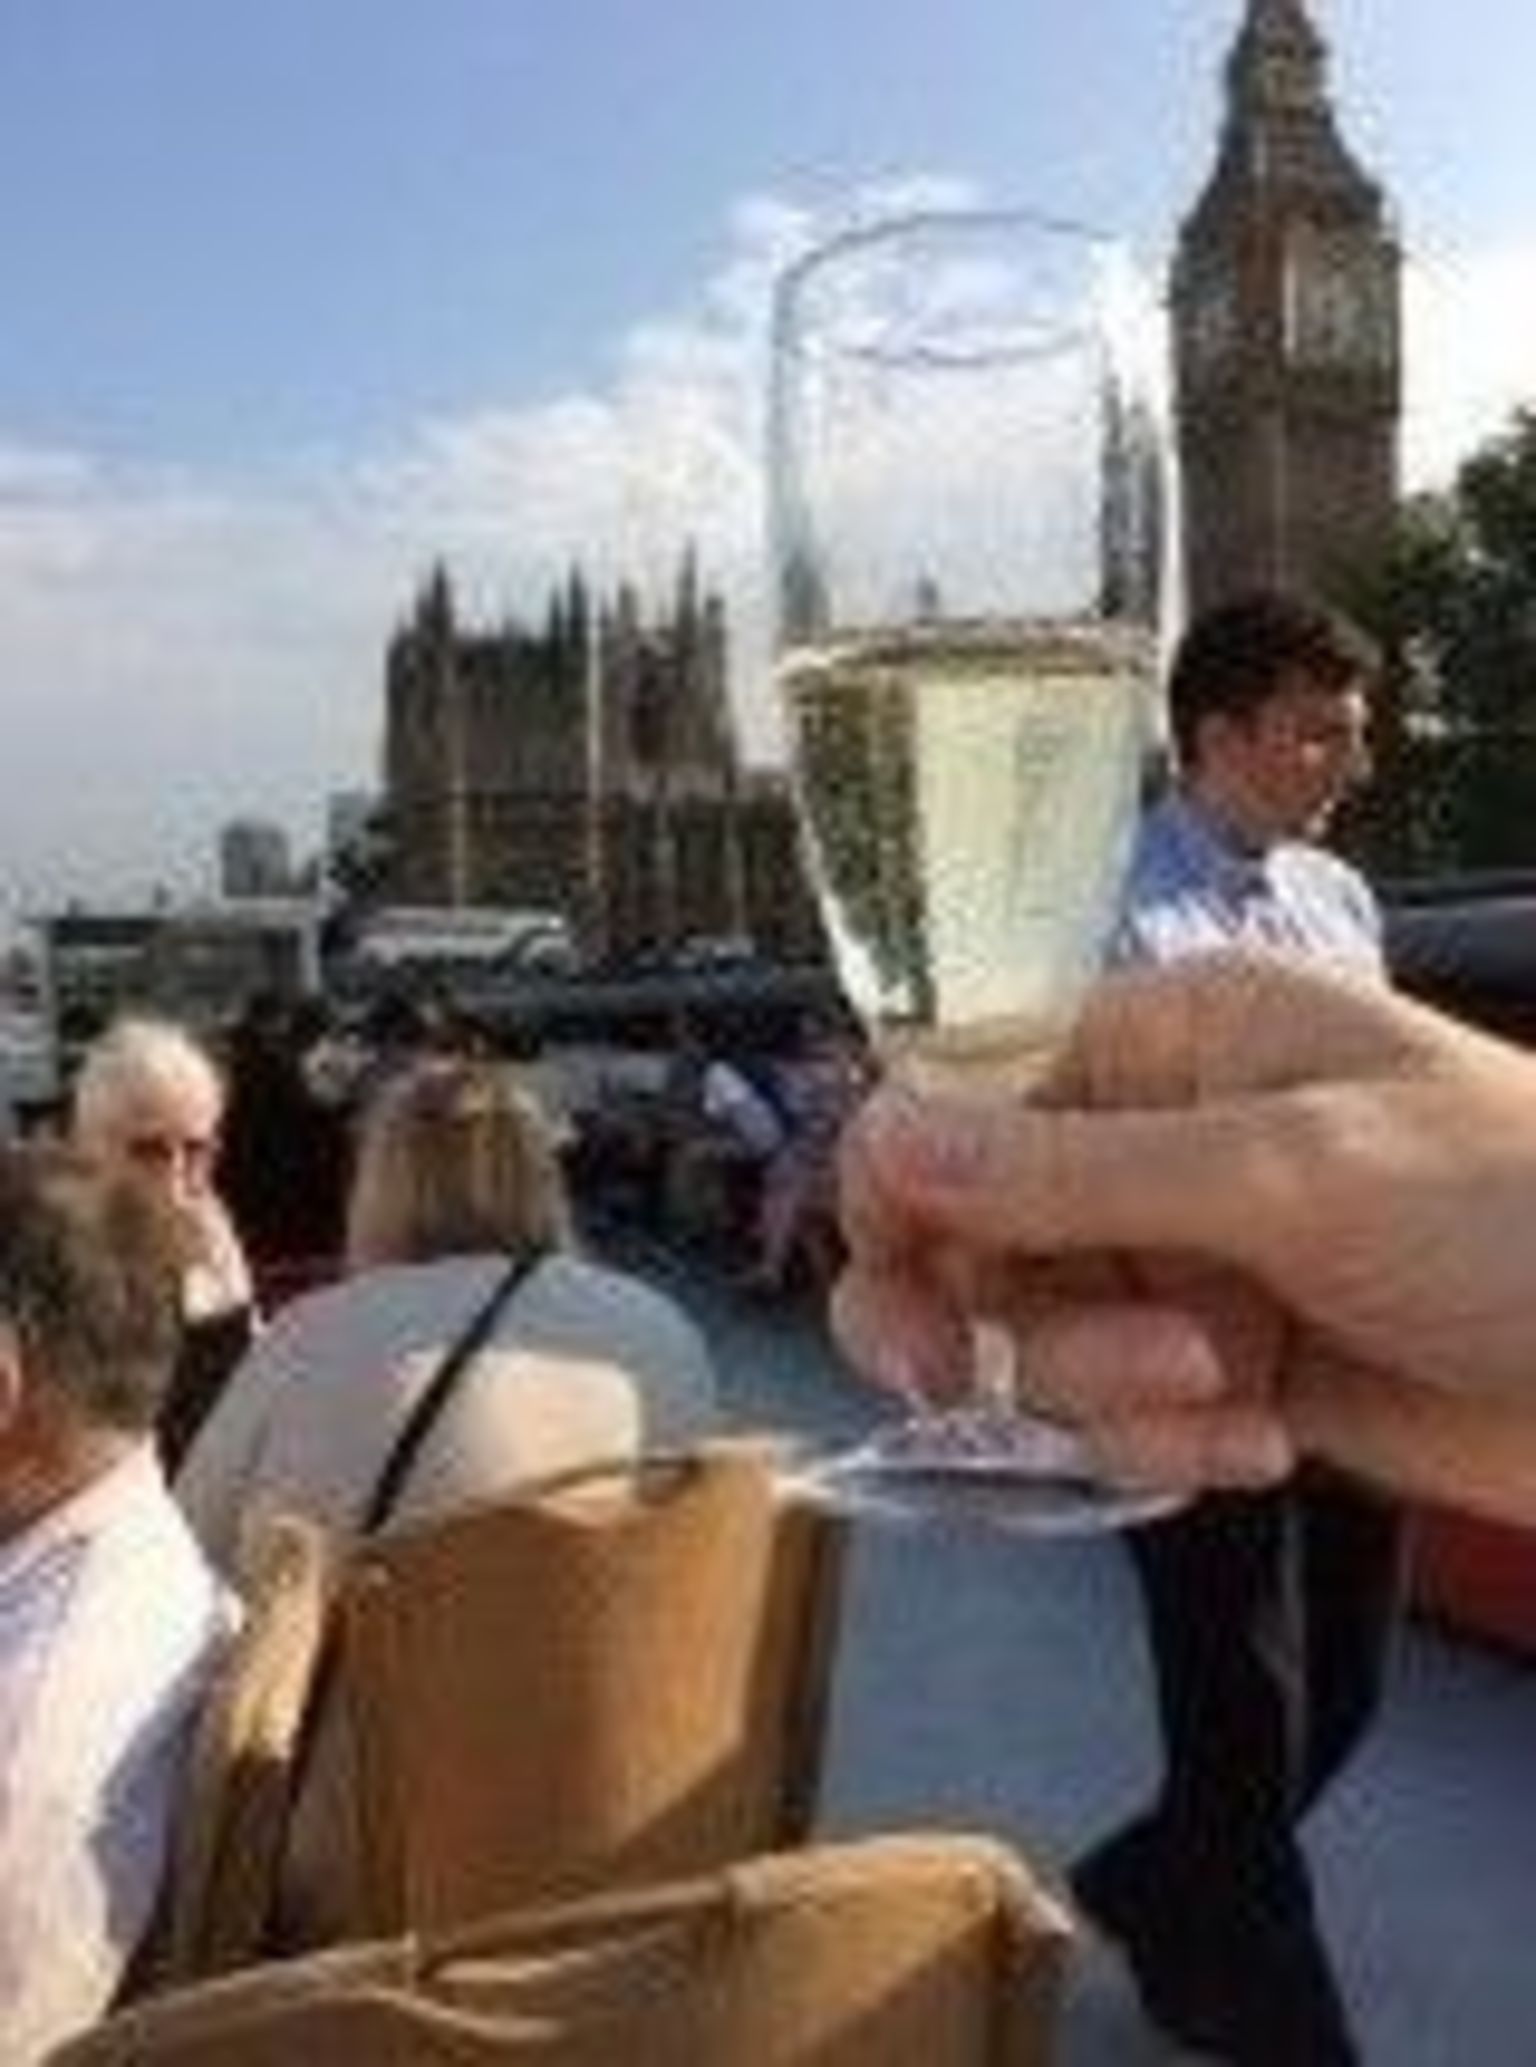 Bubbly on The Thames.